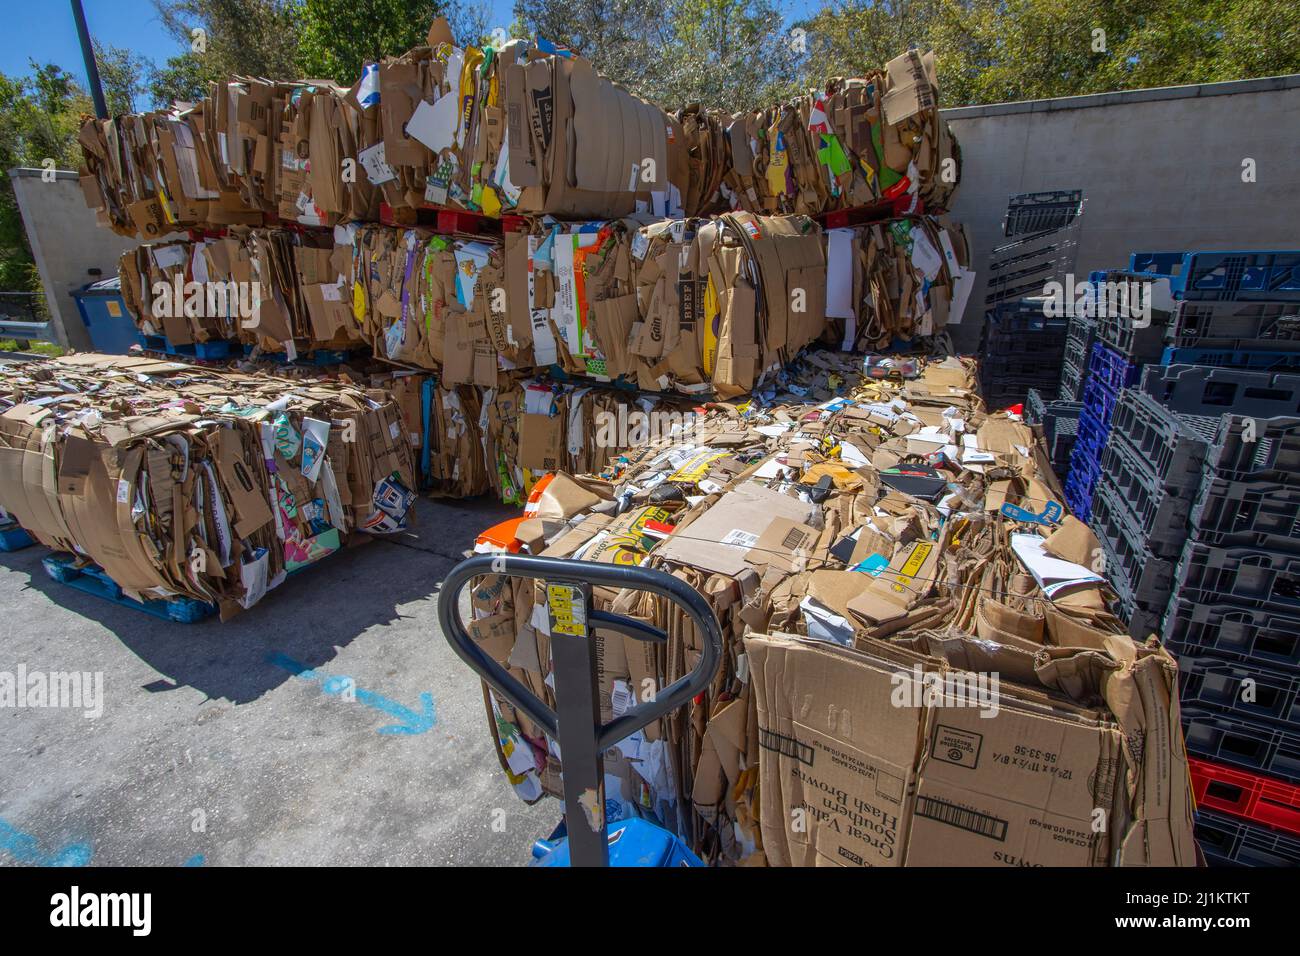 Cardboard bundled for recycling Stock Photo